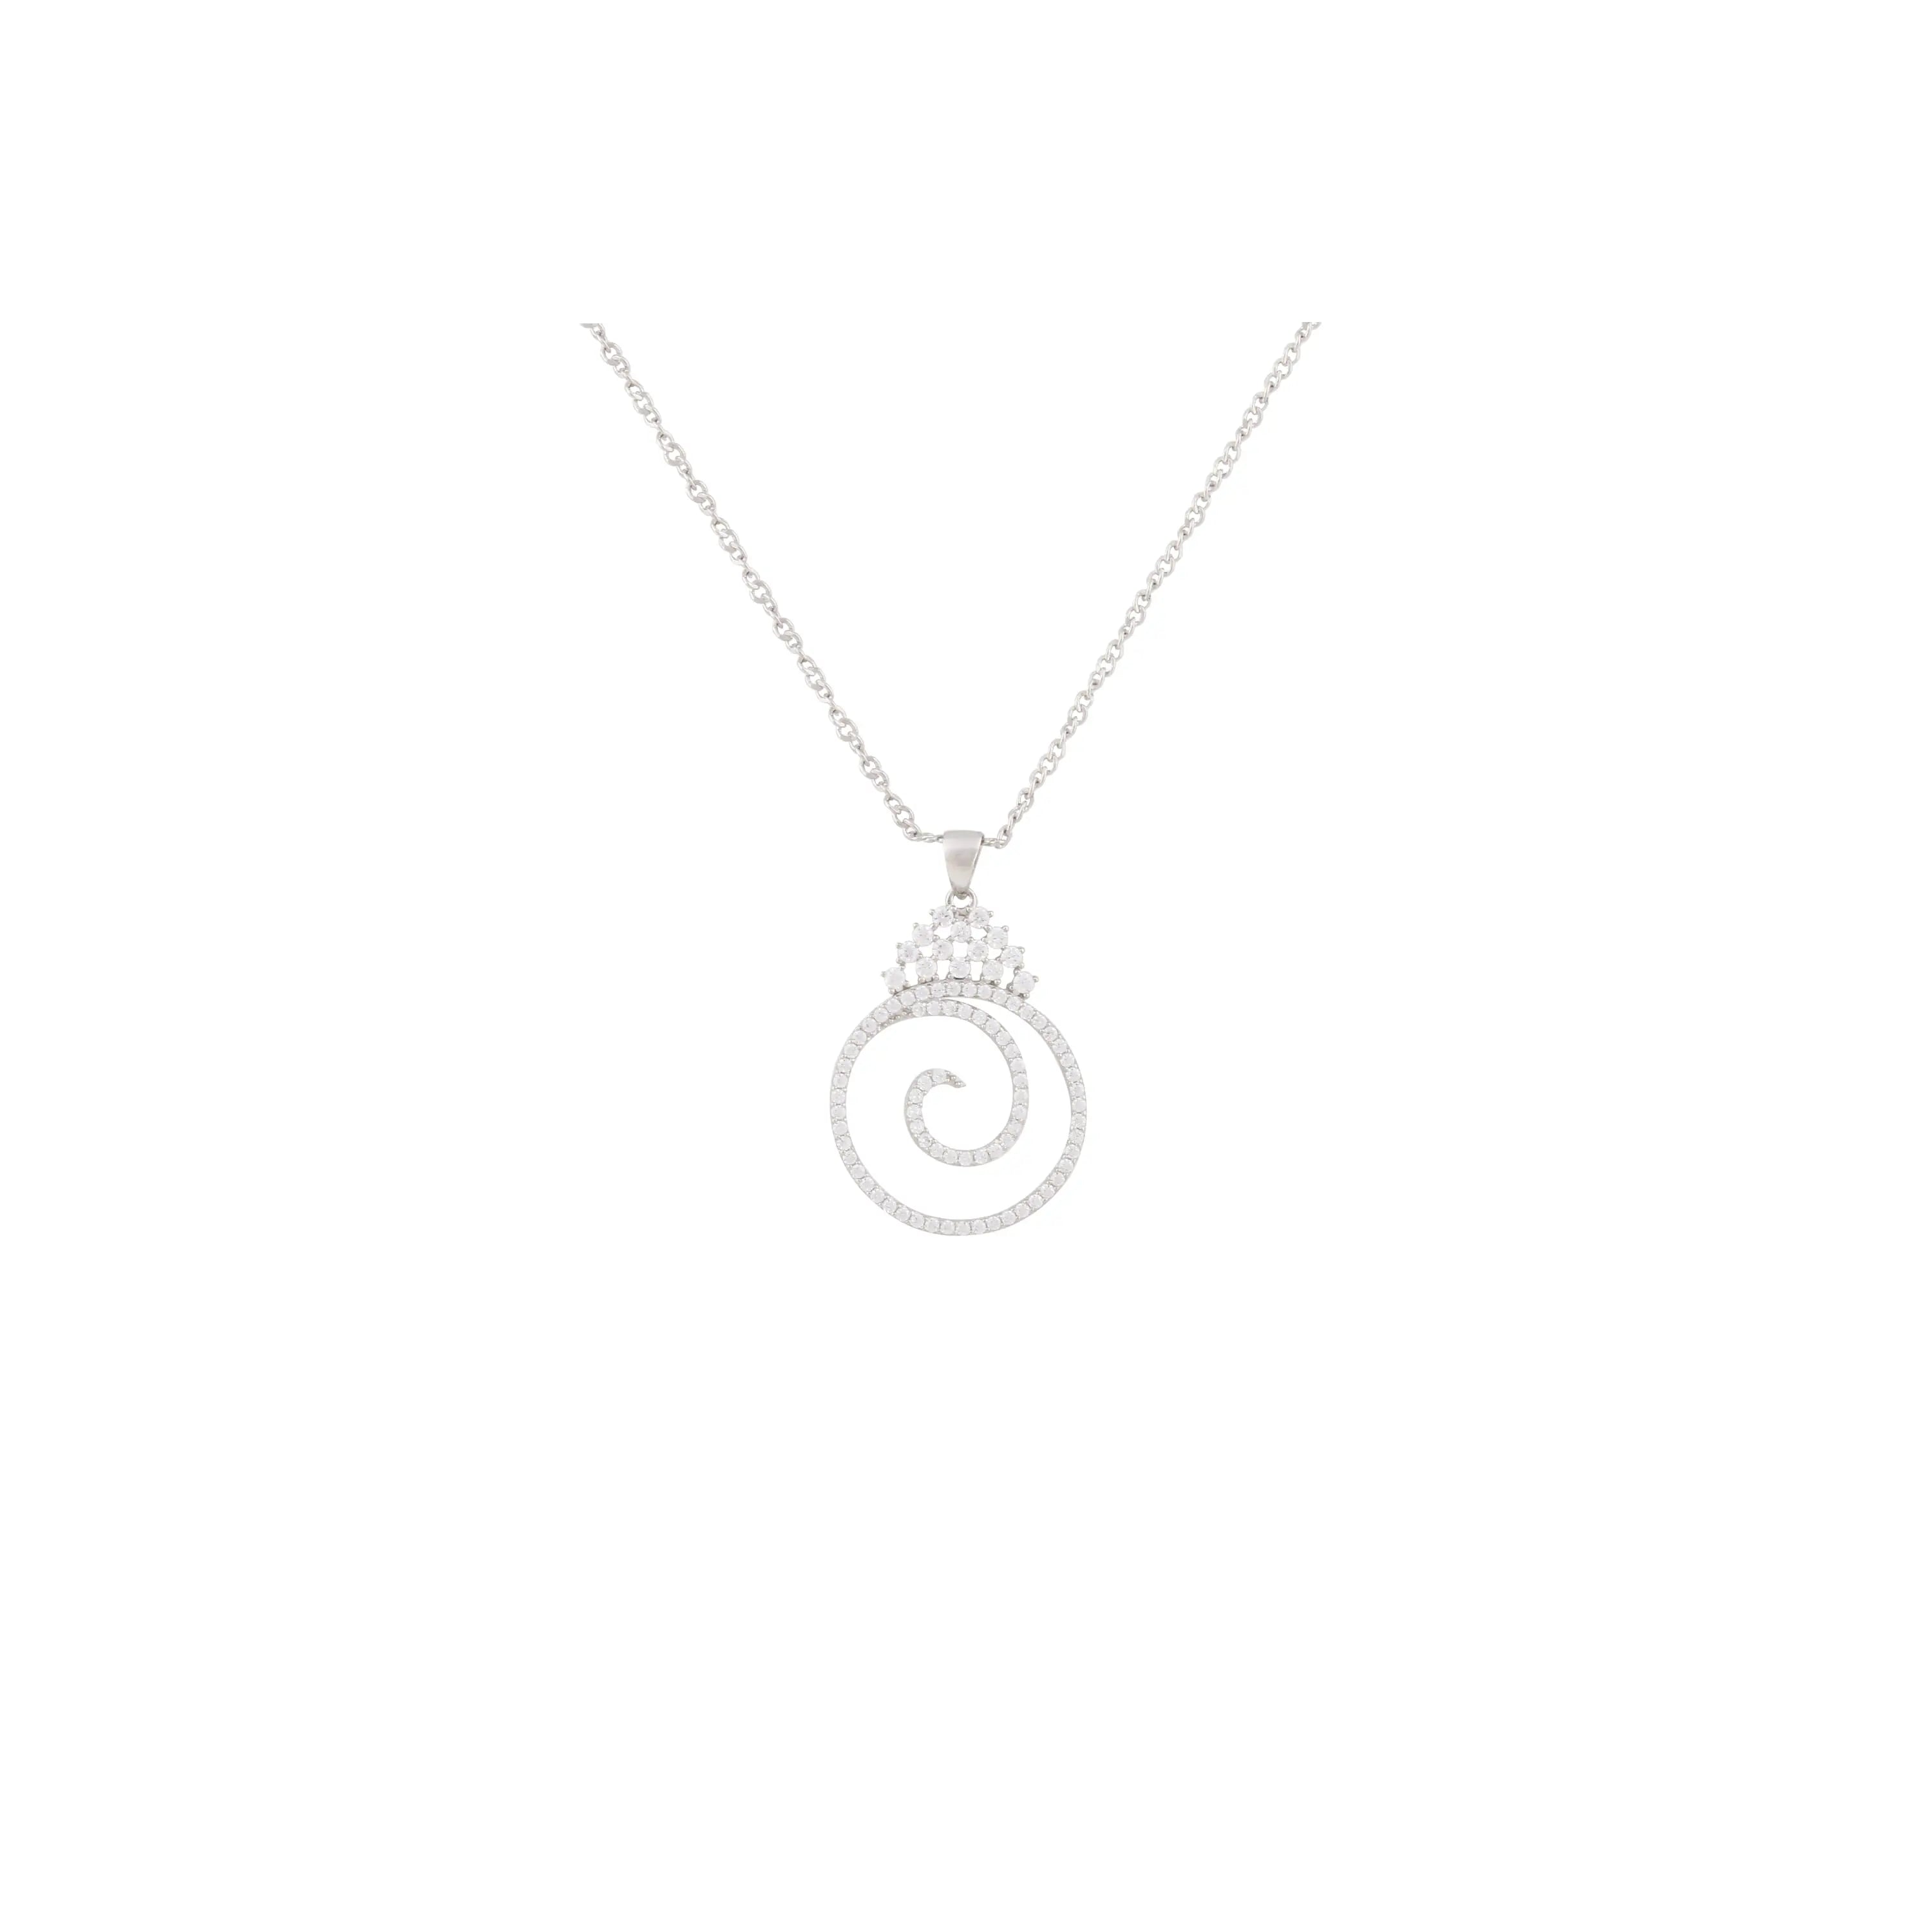 Asfour Chain Necklace Made Of 925 Sterling Silver With Circle Pendant Inlaid With Transparent Circular Stones Of Zircon